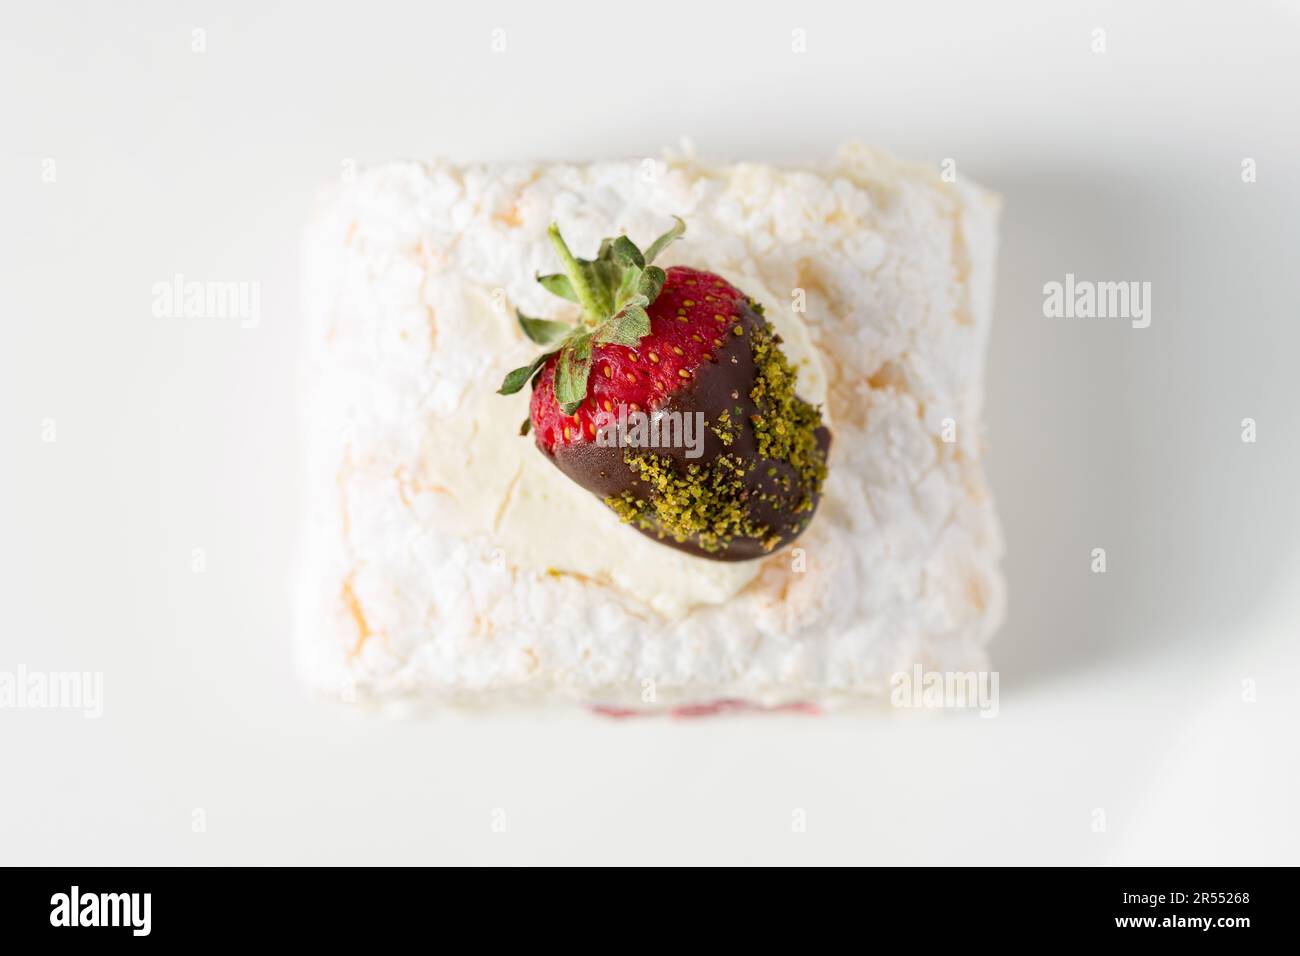 Strawberry roll cake with tea next to it on stone table Stock Photo